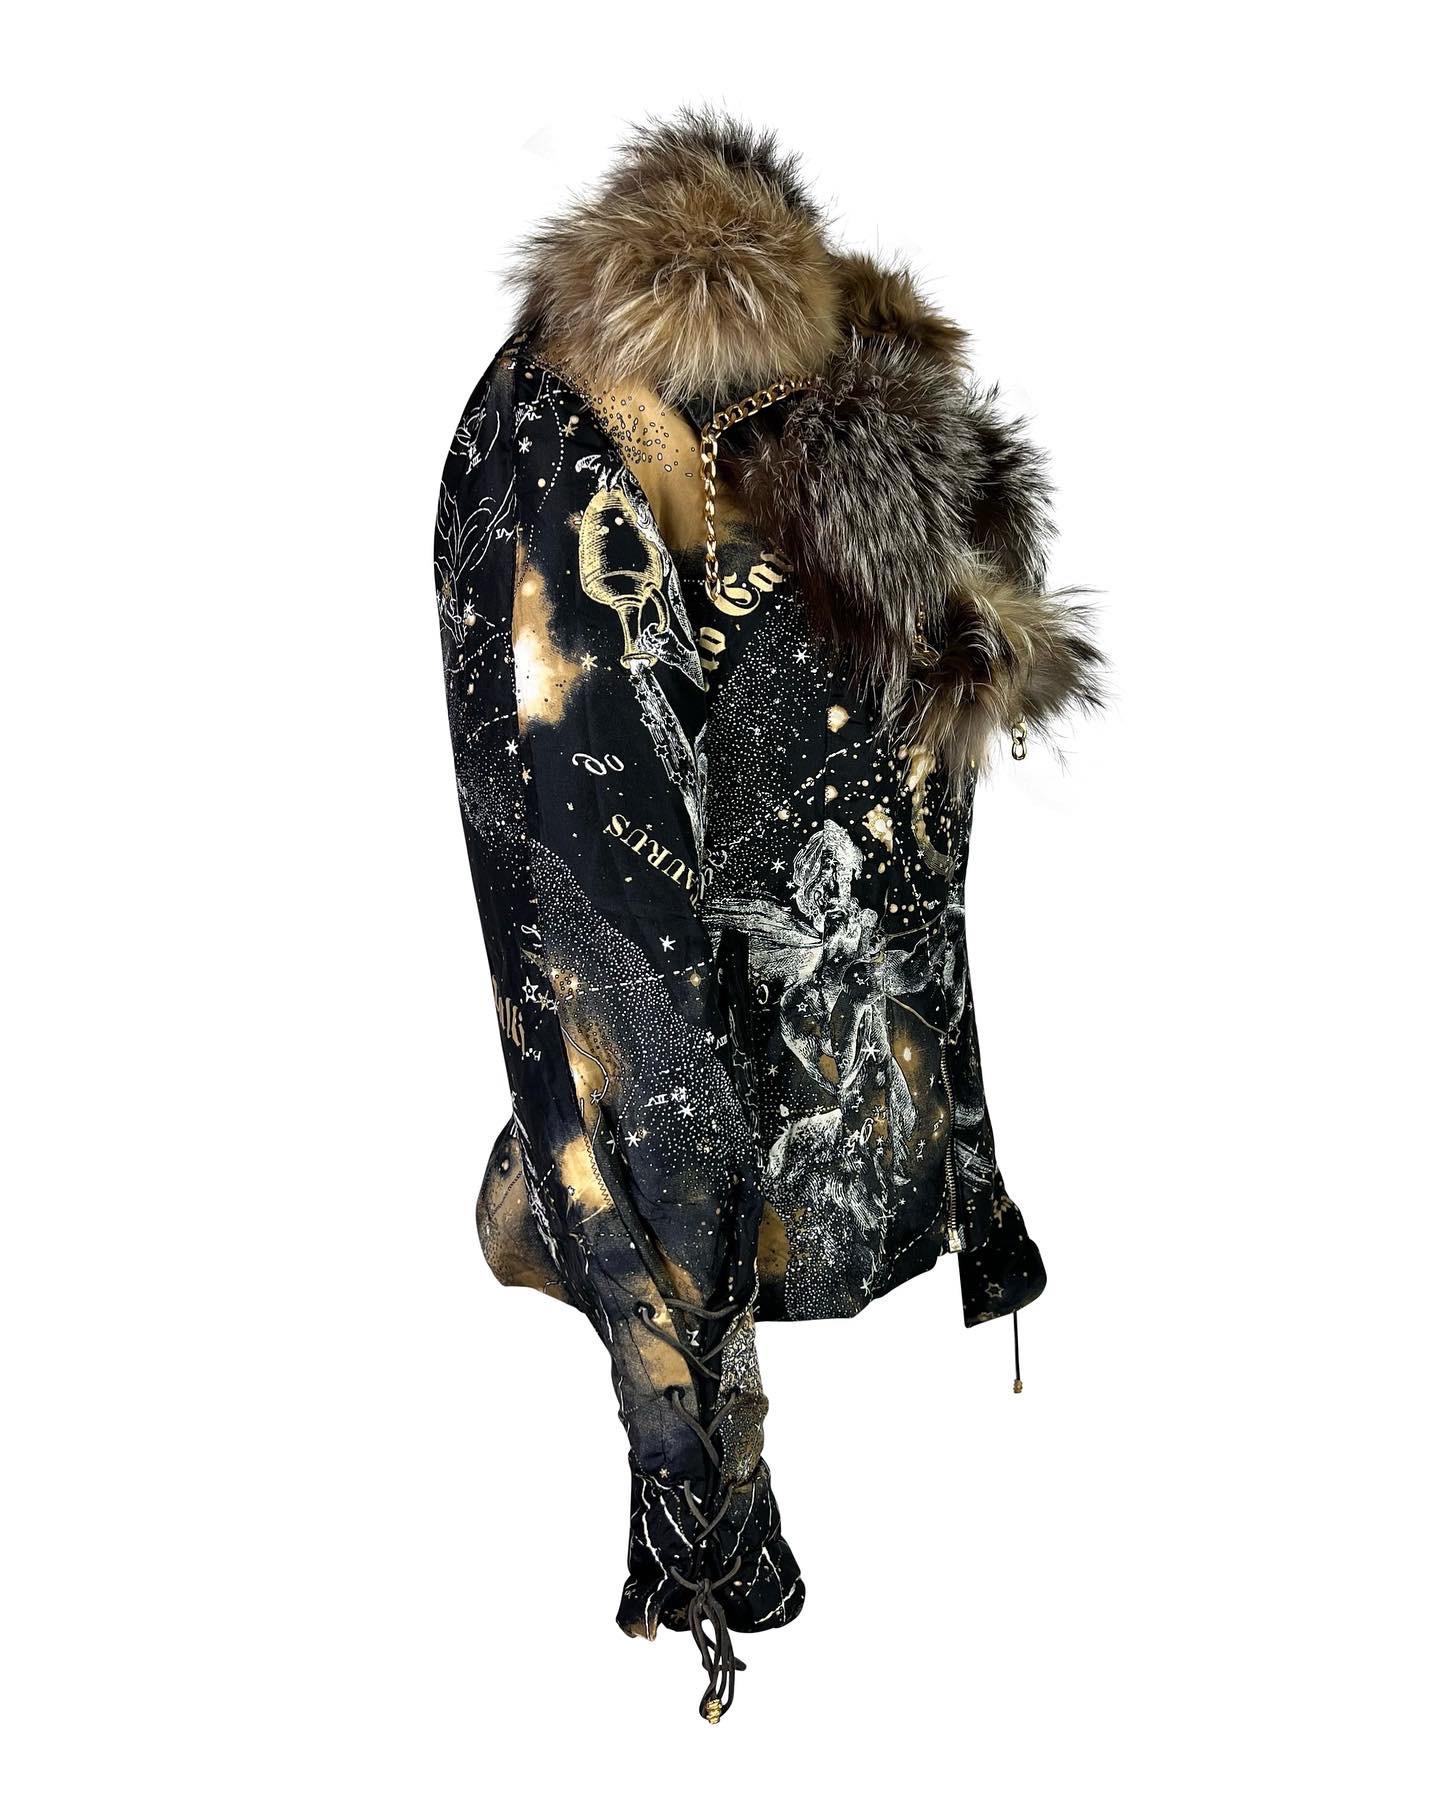 Stunning 100% silk Roberto Cavalli puffer jacket with a detachable genuine fox fur collar. 

Size label marked Small, but will fit anyone between XS and M.

Excellent vintage condition.